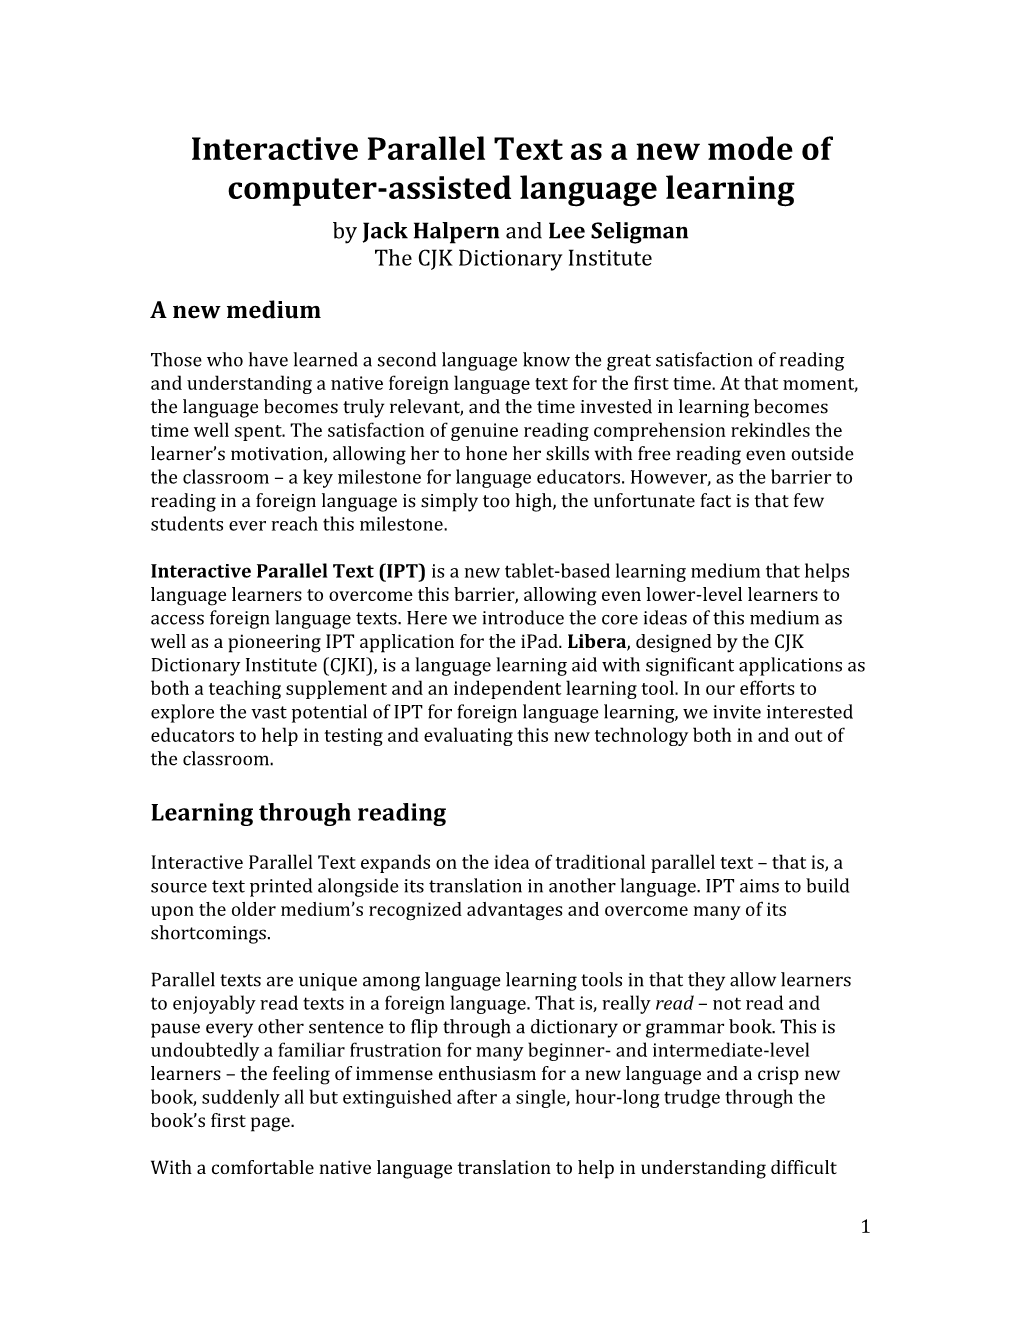 Interactive Parallel Text As a New Mode of Computer-Assisted Language Learning